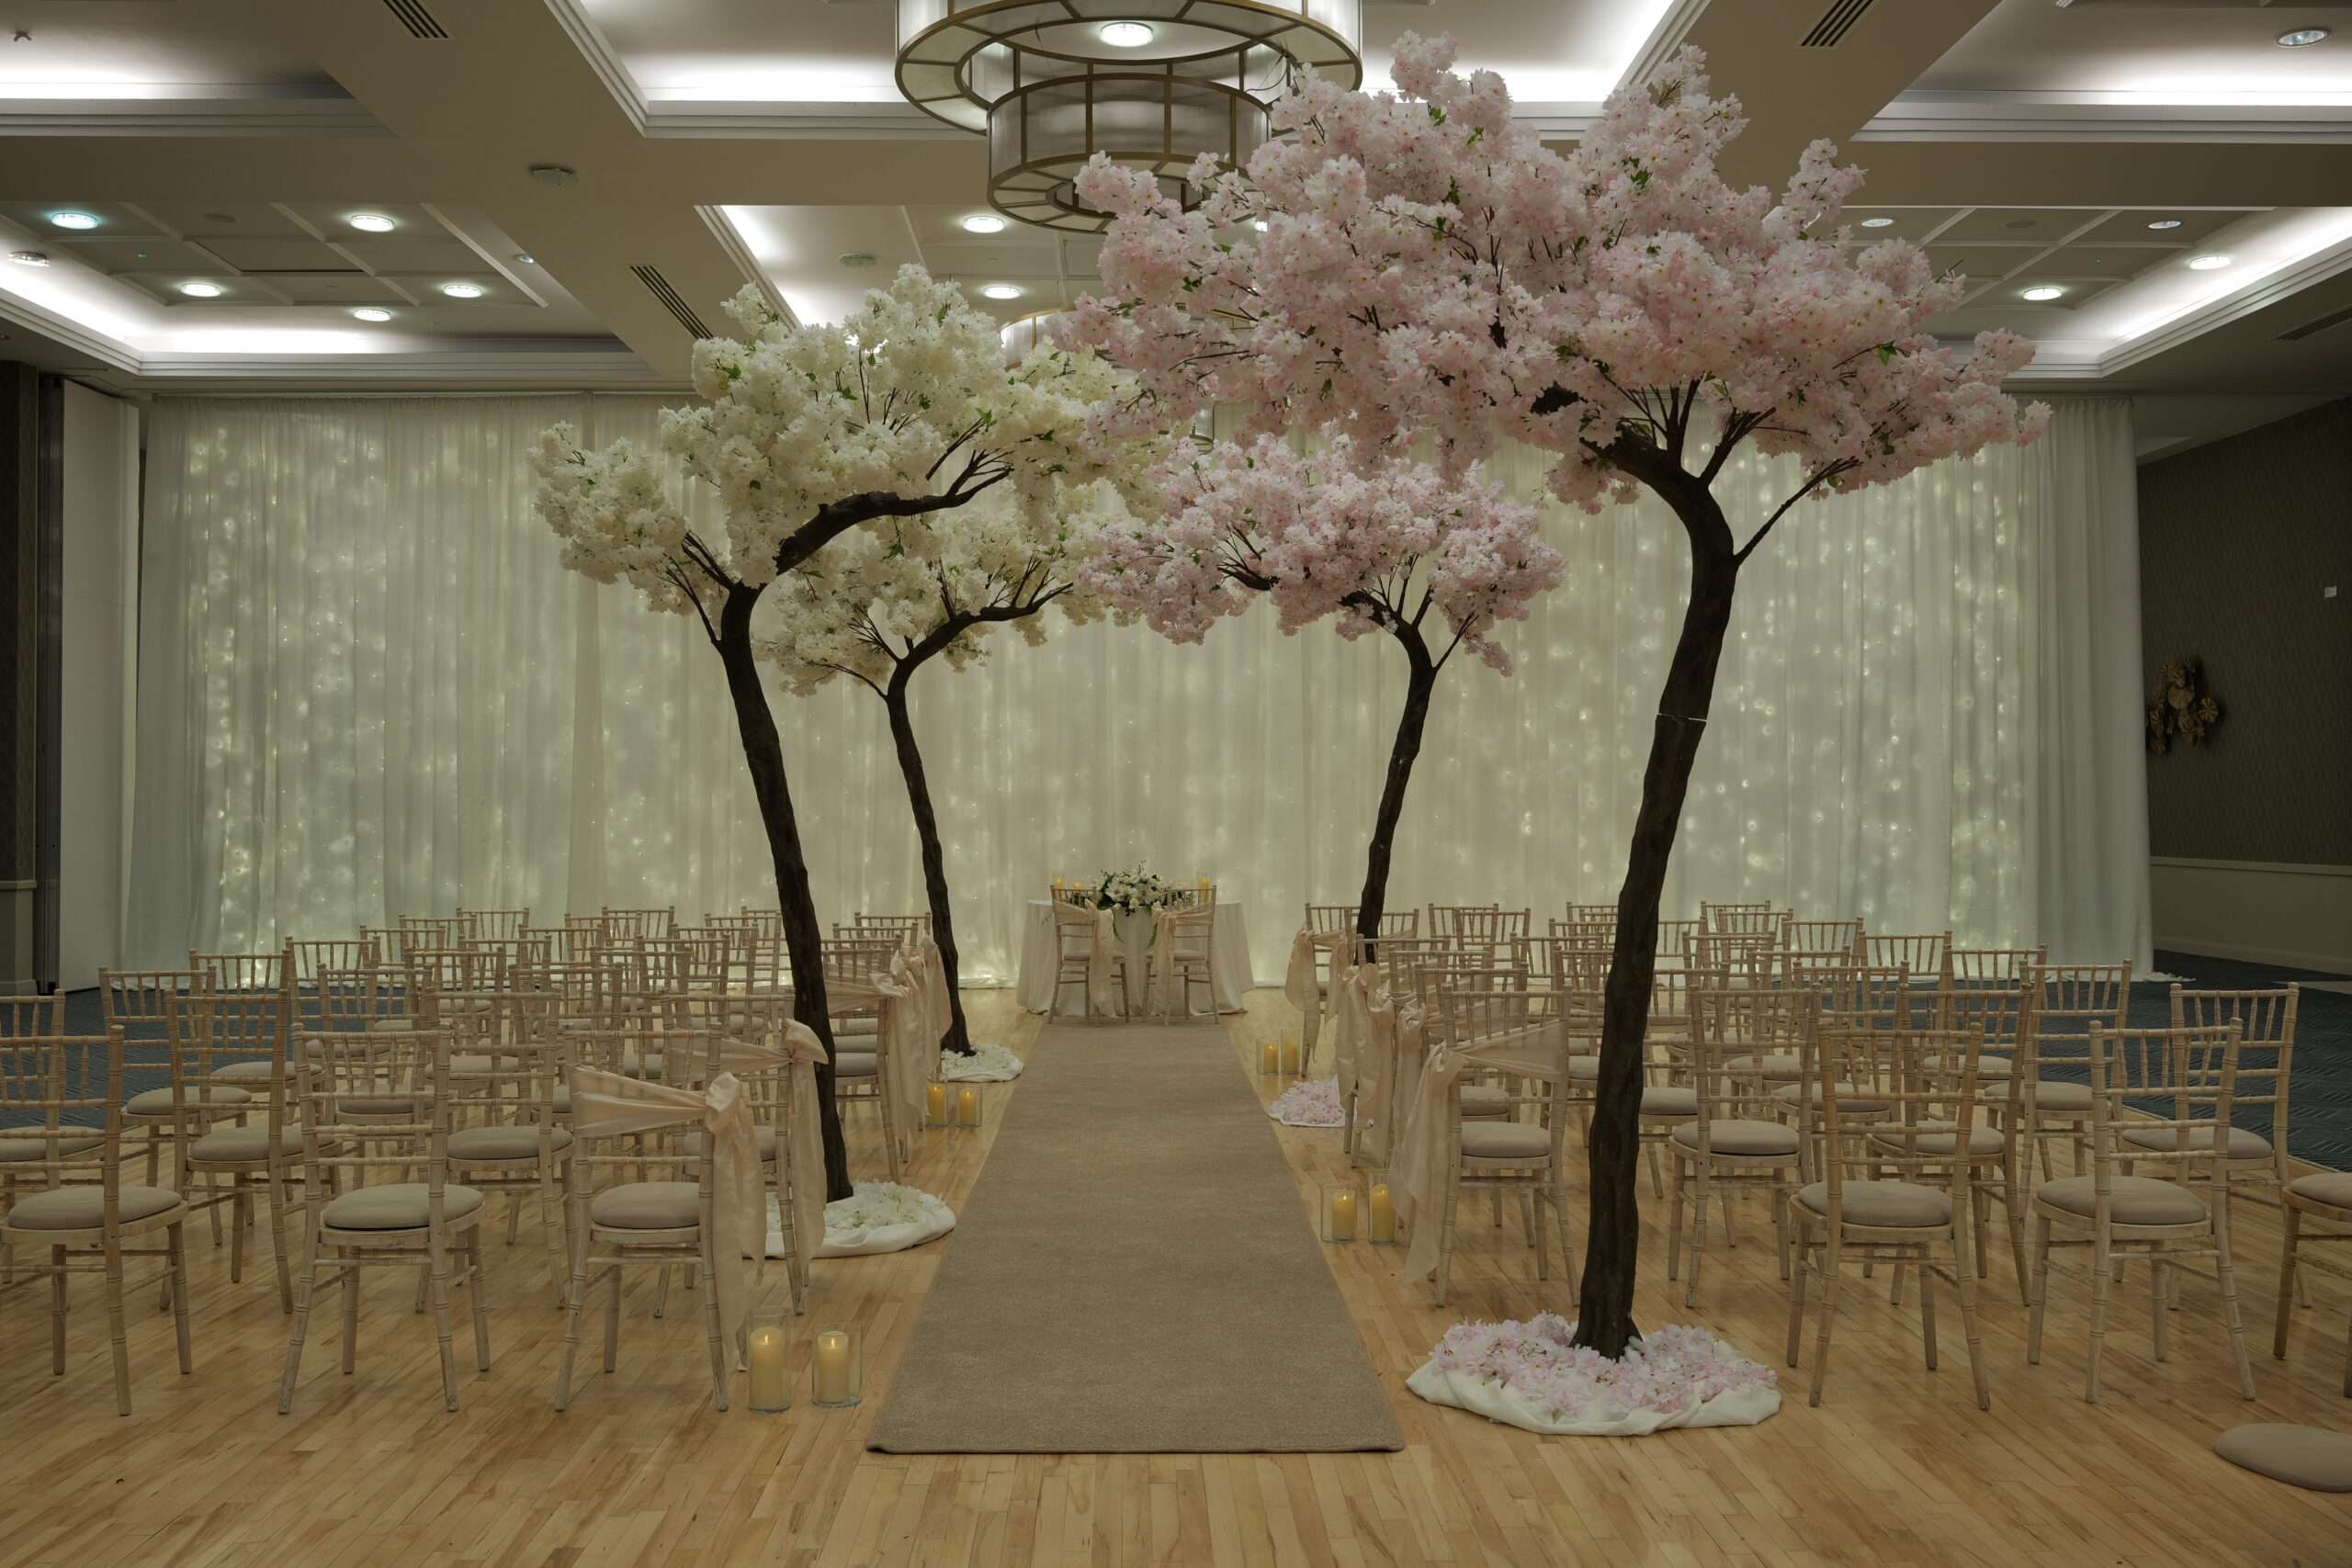 Civil-Ceremony-Aisle-Ivory-&-Pink-Cherry-Blossom-Arches-Candles-Ivory-Carpet-Fairways-Hotel-Dundalk-Co-Louth